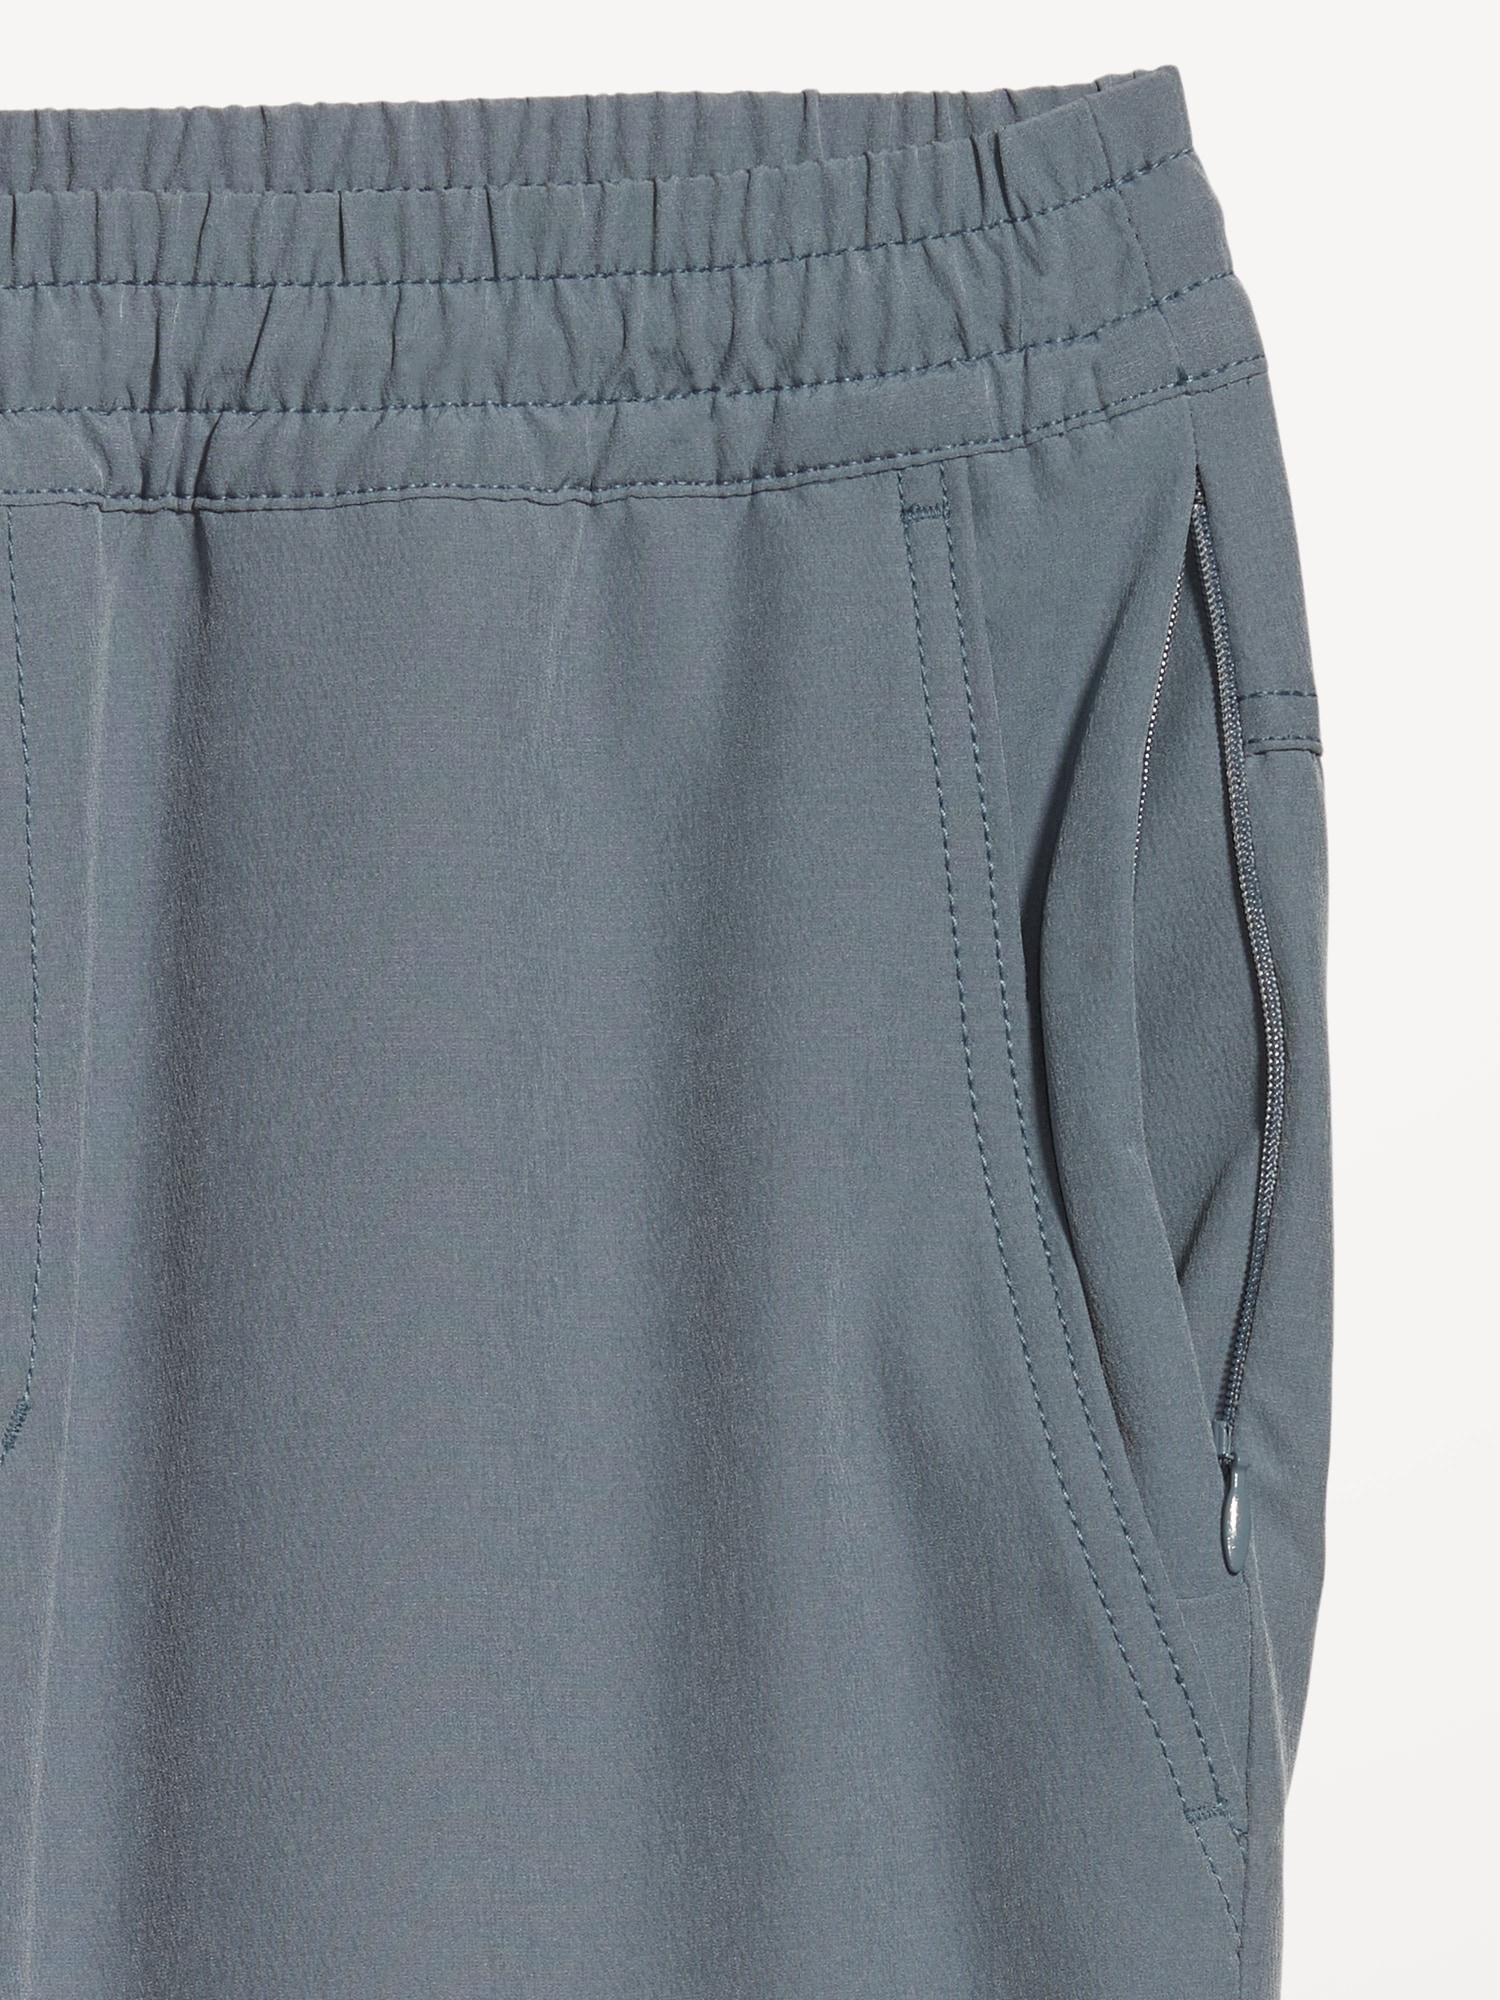 StretchTech Water-Repellent Jogger Pants | Old Navy